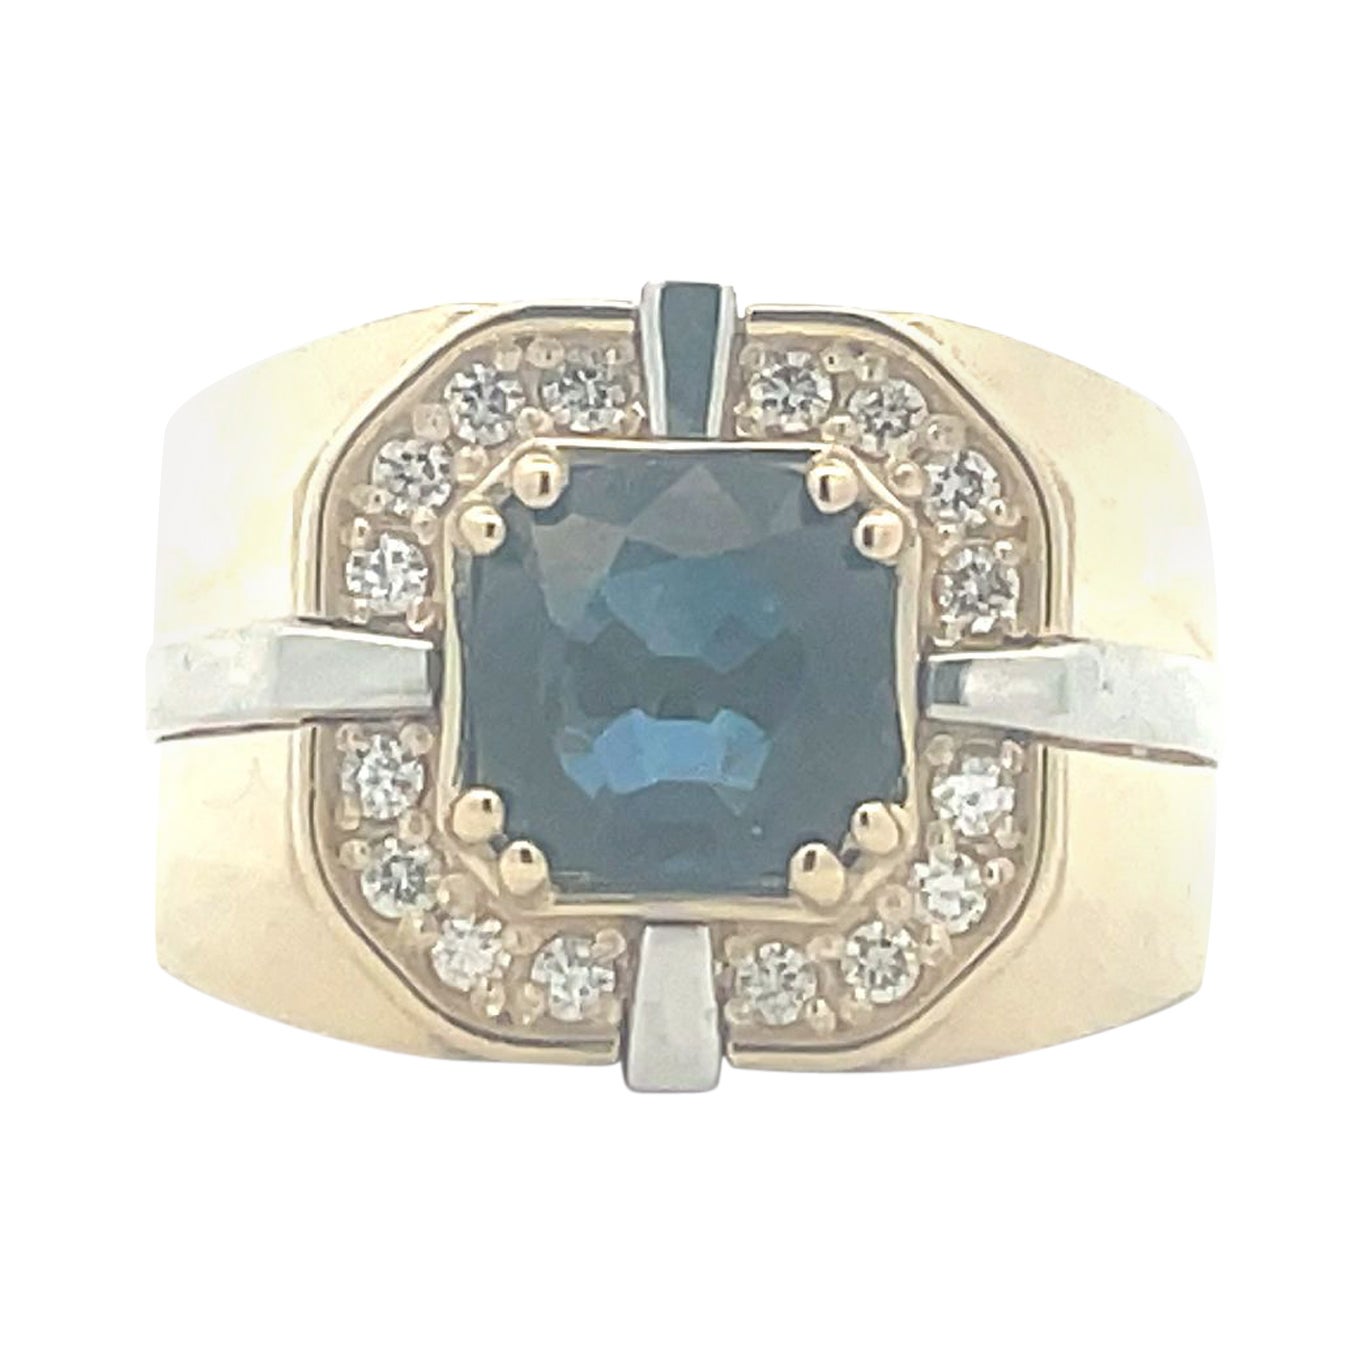 3.20 ct. Cushion Sapphire Diamond Cluster Men's Signet Ring in 14K Yellow Gold